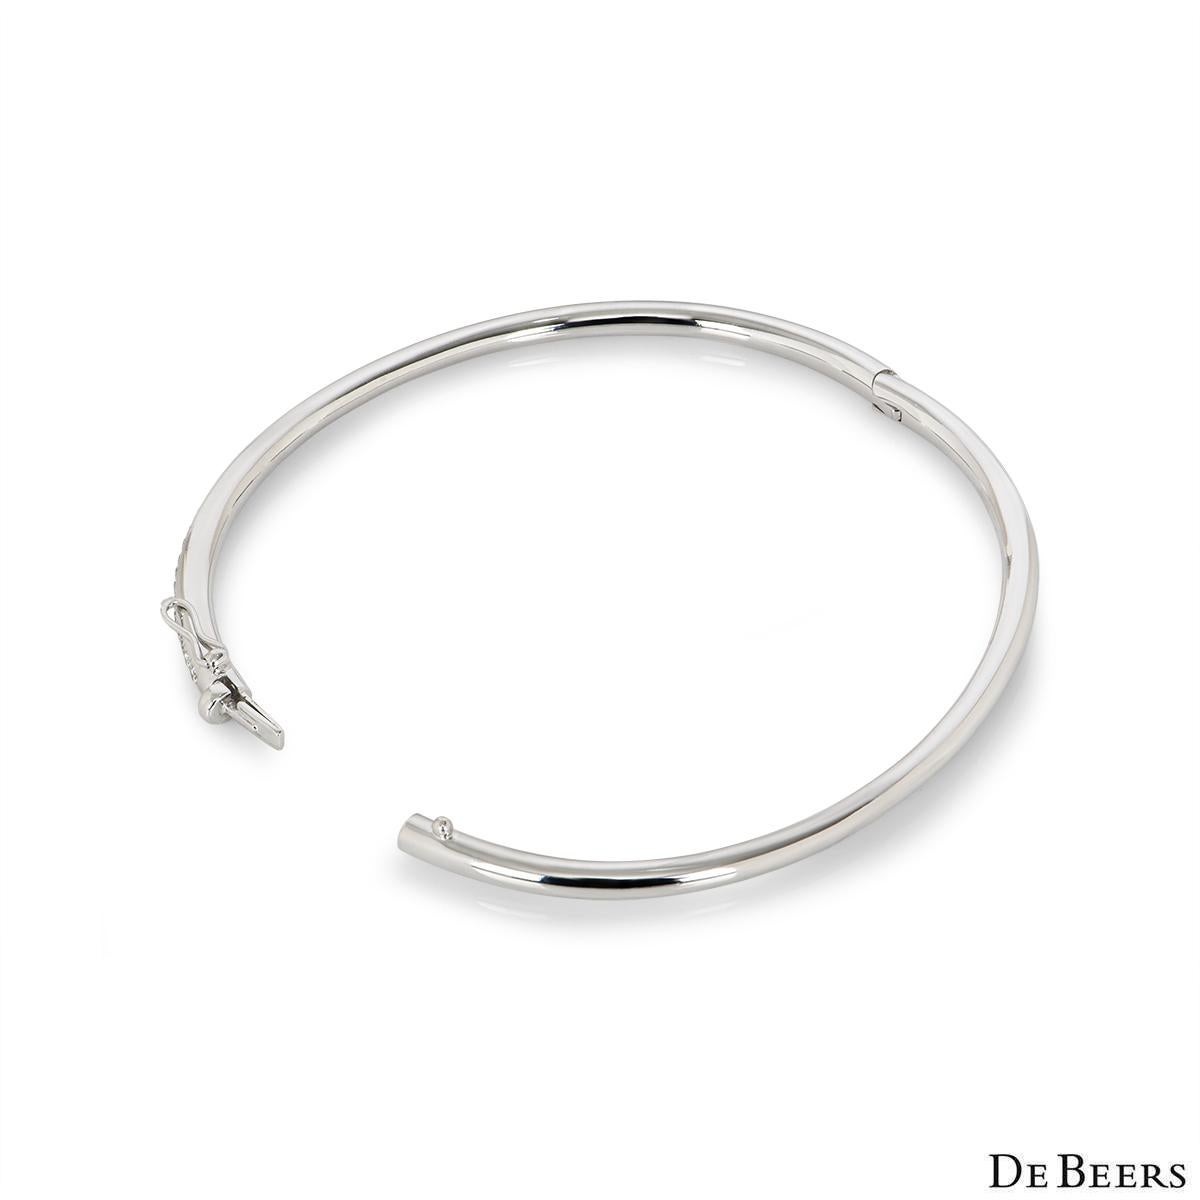 De Beers White Gold Classic Diamond Bangle B102113 In Excellent Condition For Sale In London, GB